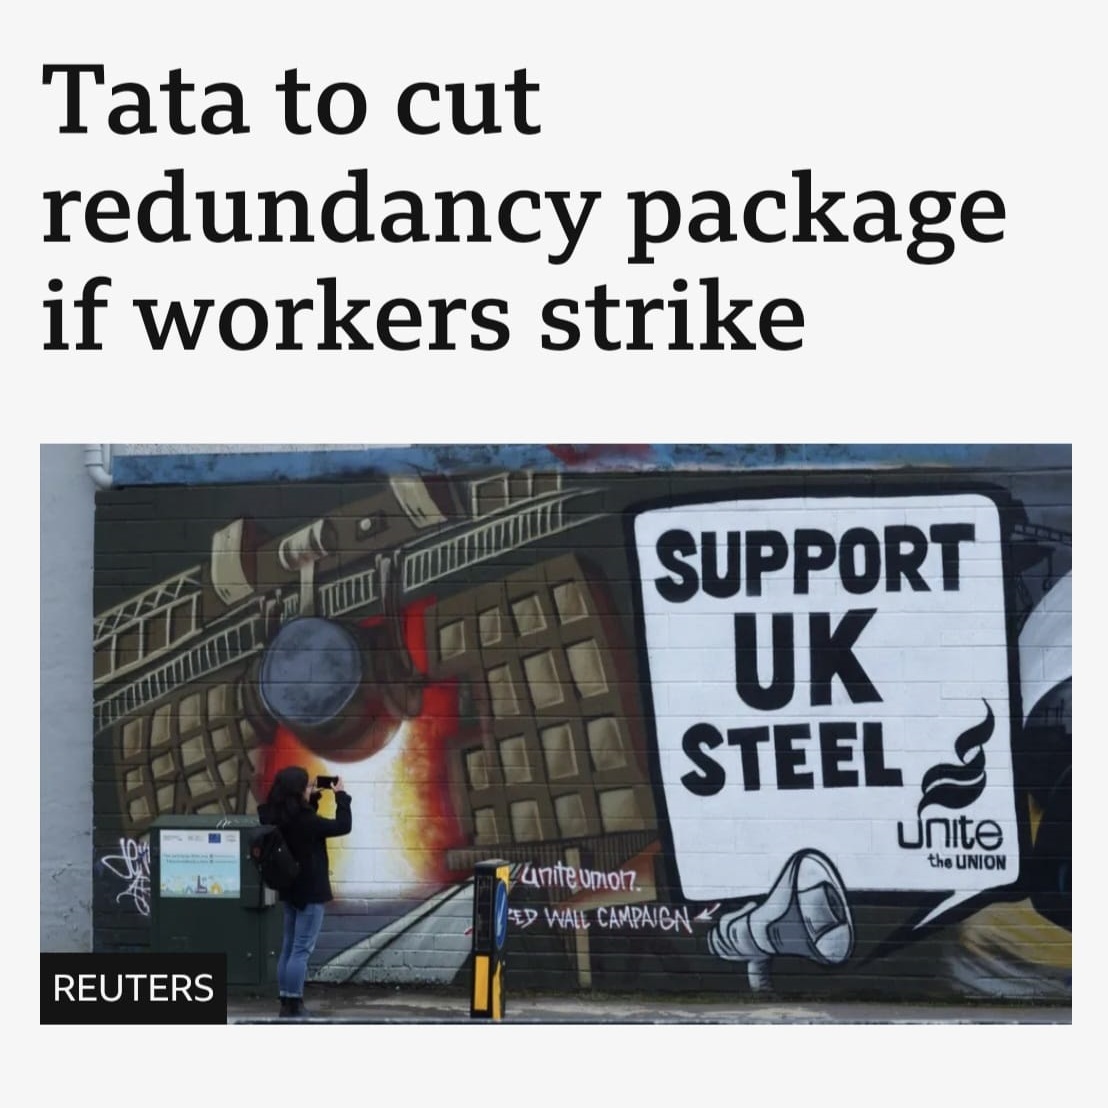 Tata's threat to withdraw redundancy deals from those campaigning for jobs is morally bankrupt. This assault on the right to strike is an attempt to intimidate their staff and blackmail the union. Solidarity with steel workers and Unite.